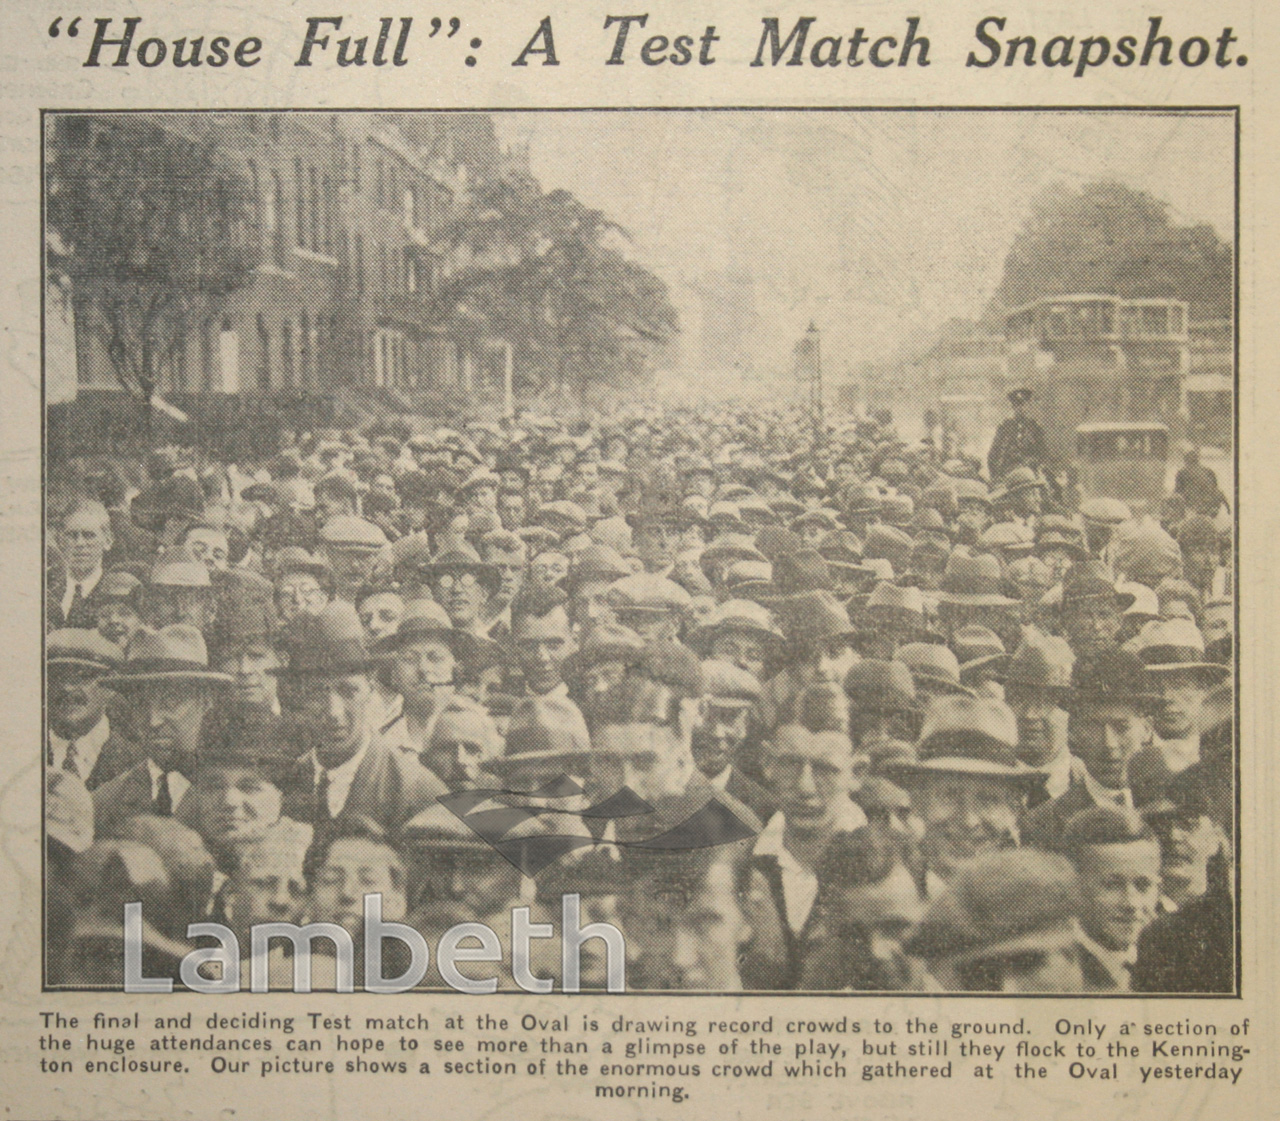 ASHES TEST MATCH CROWD, THE OVAL, KENNINGTON